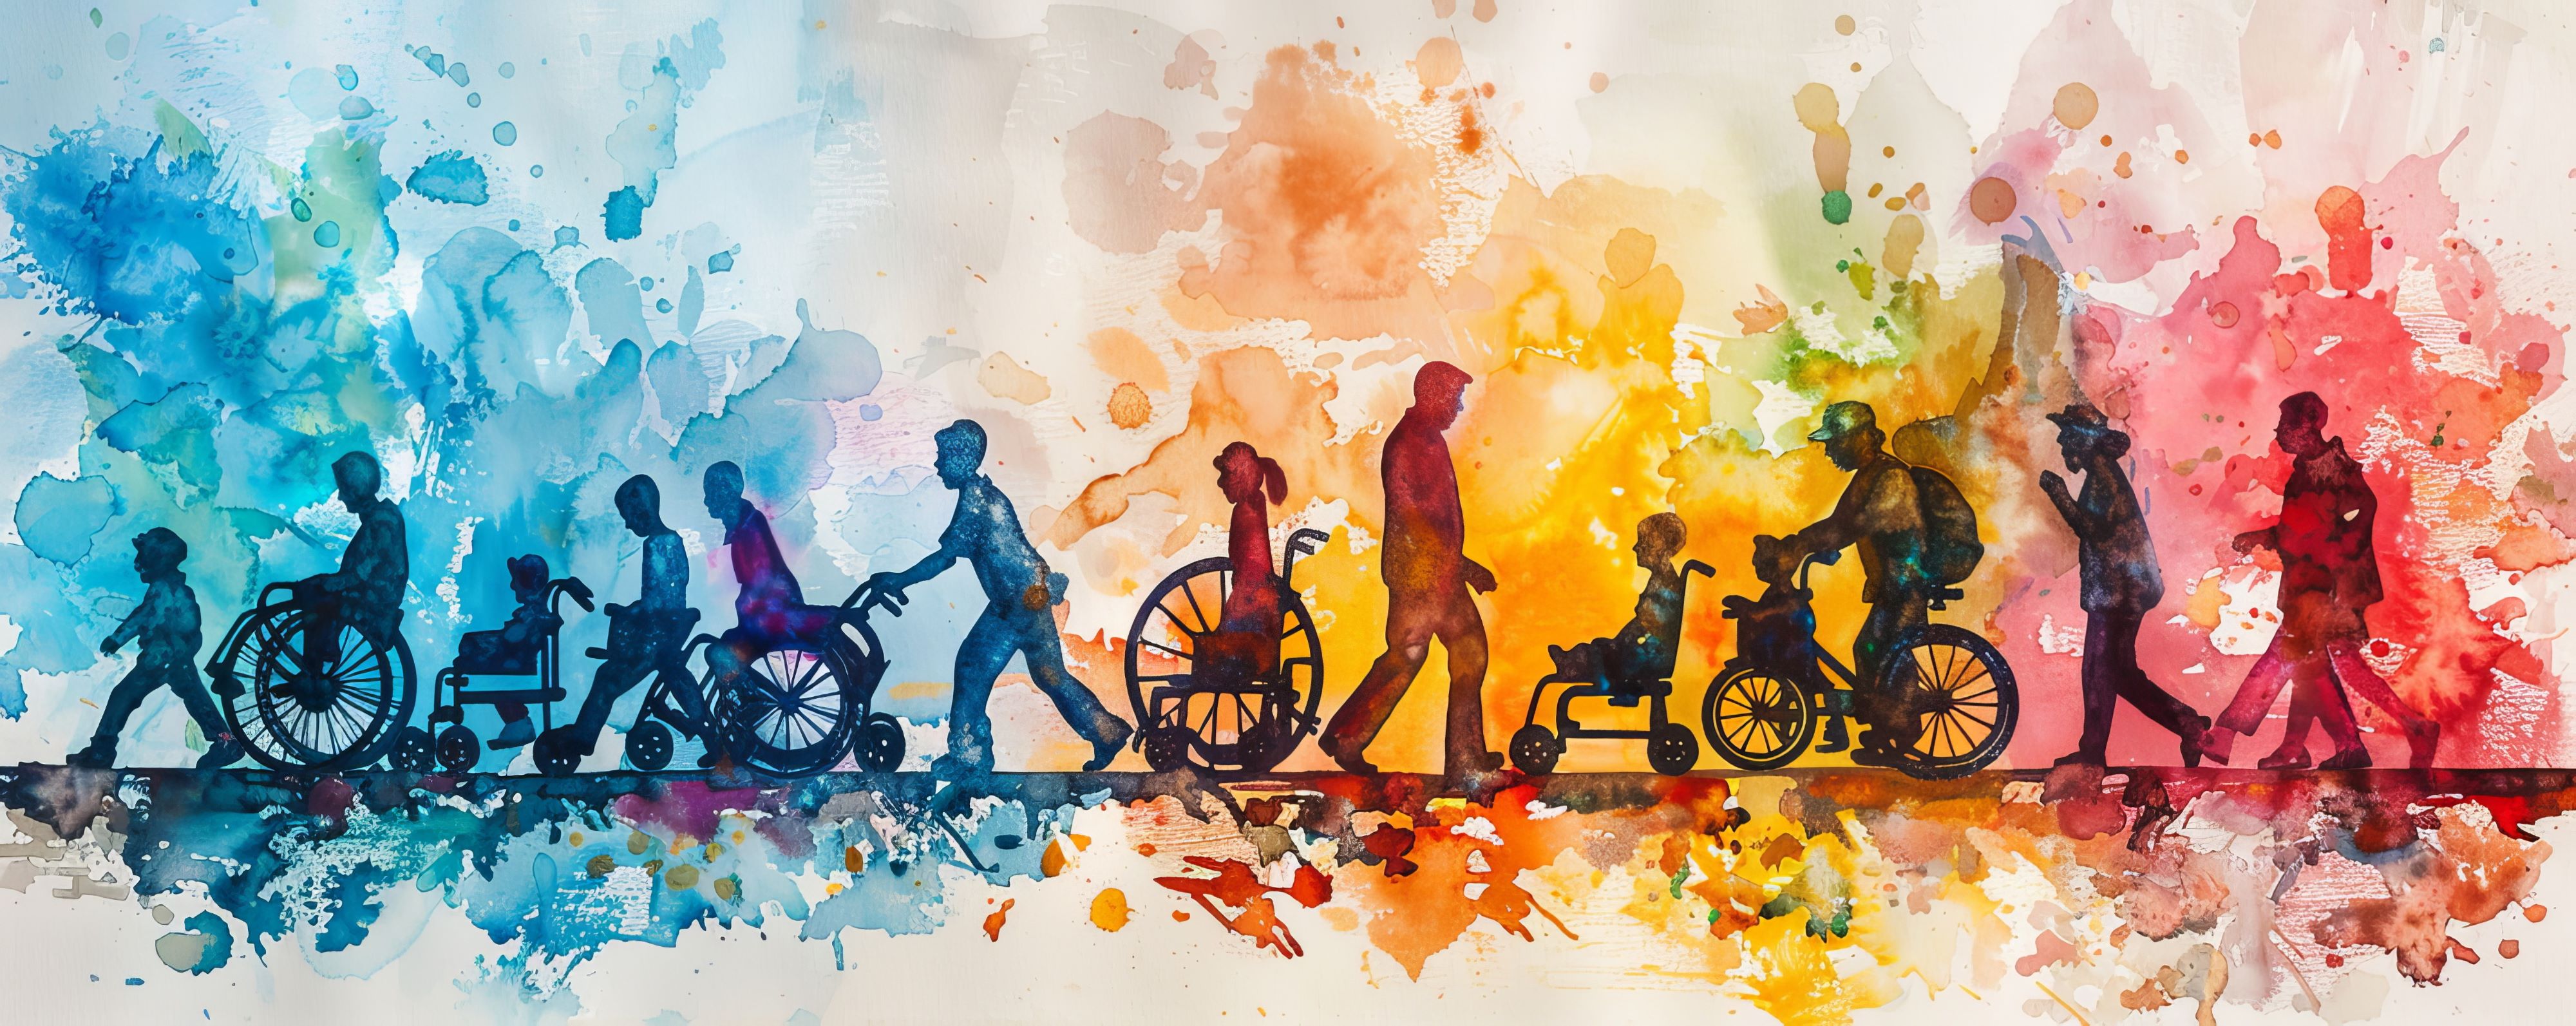 Silhouettes of diverse individuals with disabilities in a colorful watercolor style, depicting people in wheelchairs and with mobility aids on a splattered paint background.